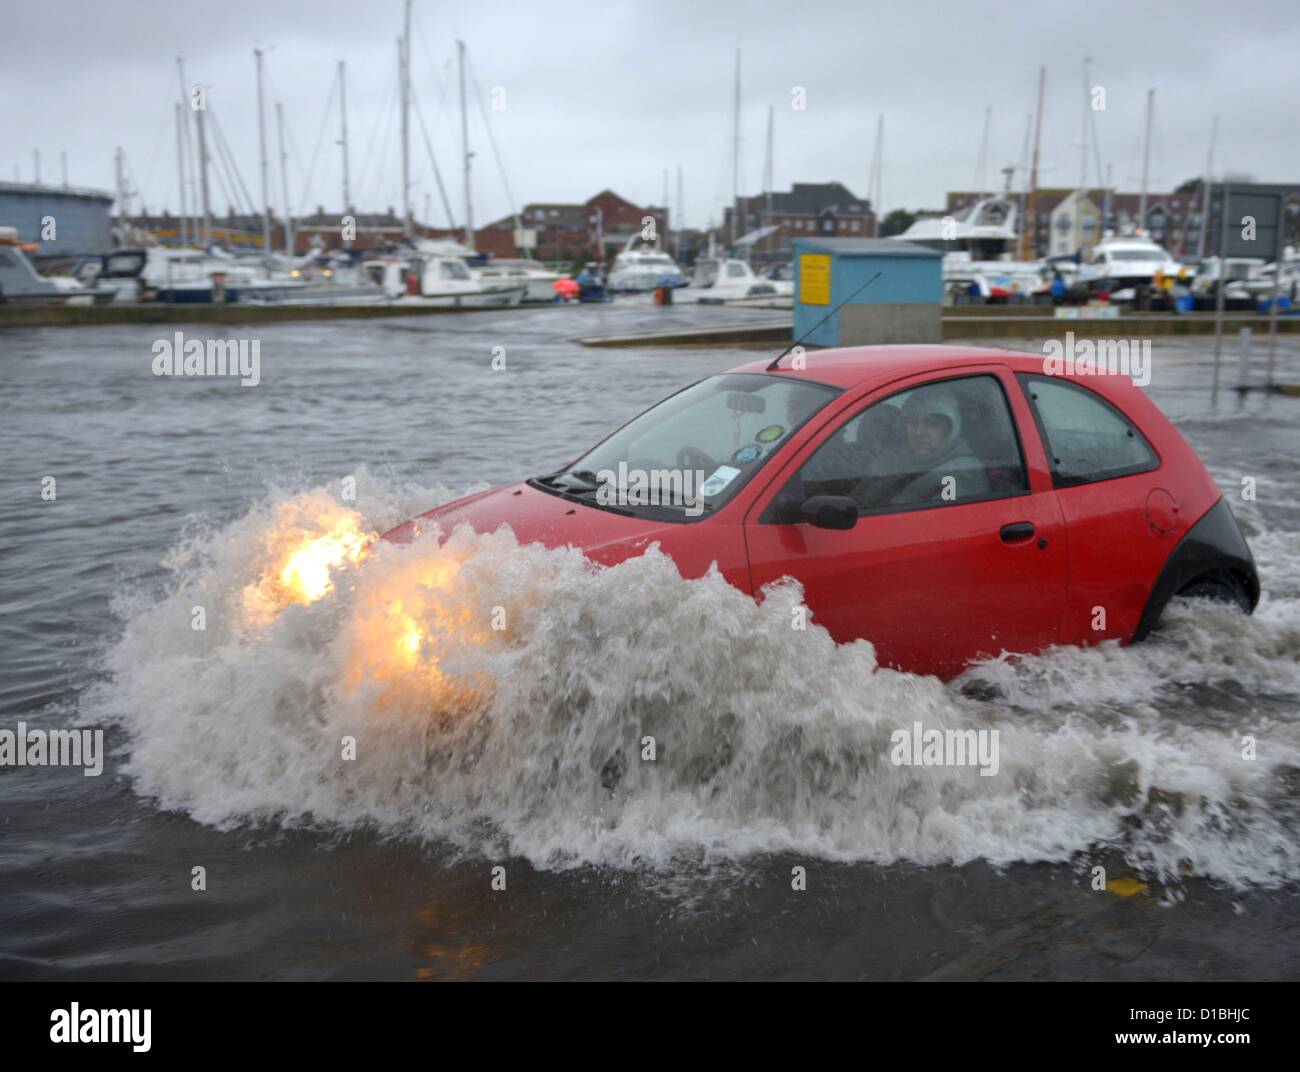 Flooding in Weymouth, Dorset , UK 14th December, 2012  PICTURE BY: DORSET MEDIA SERVICE Stock Photo